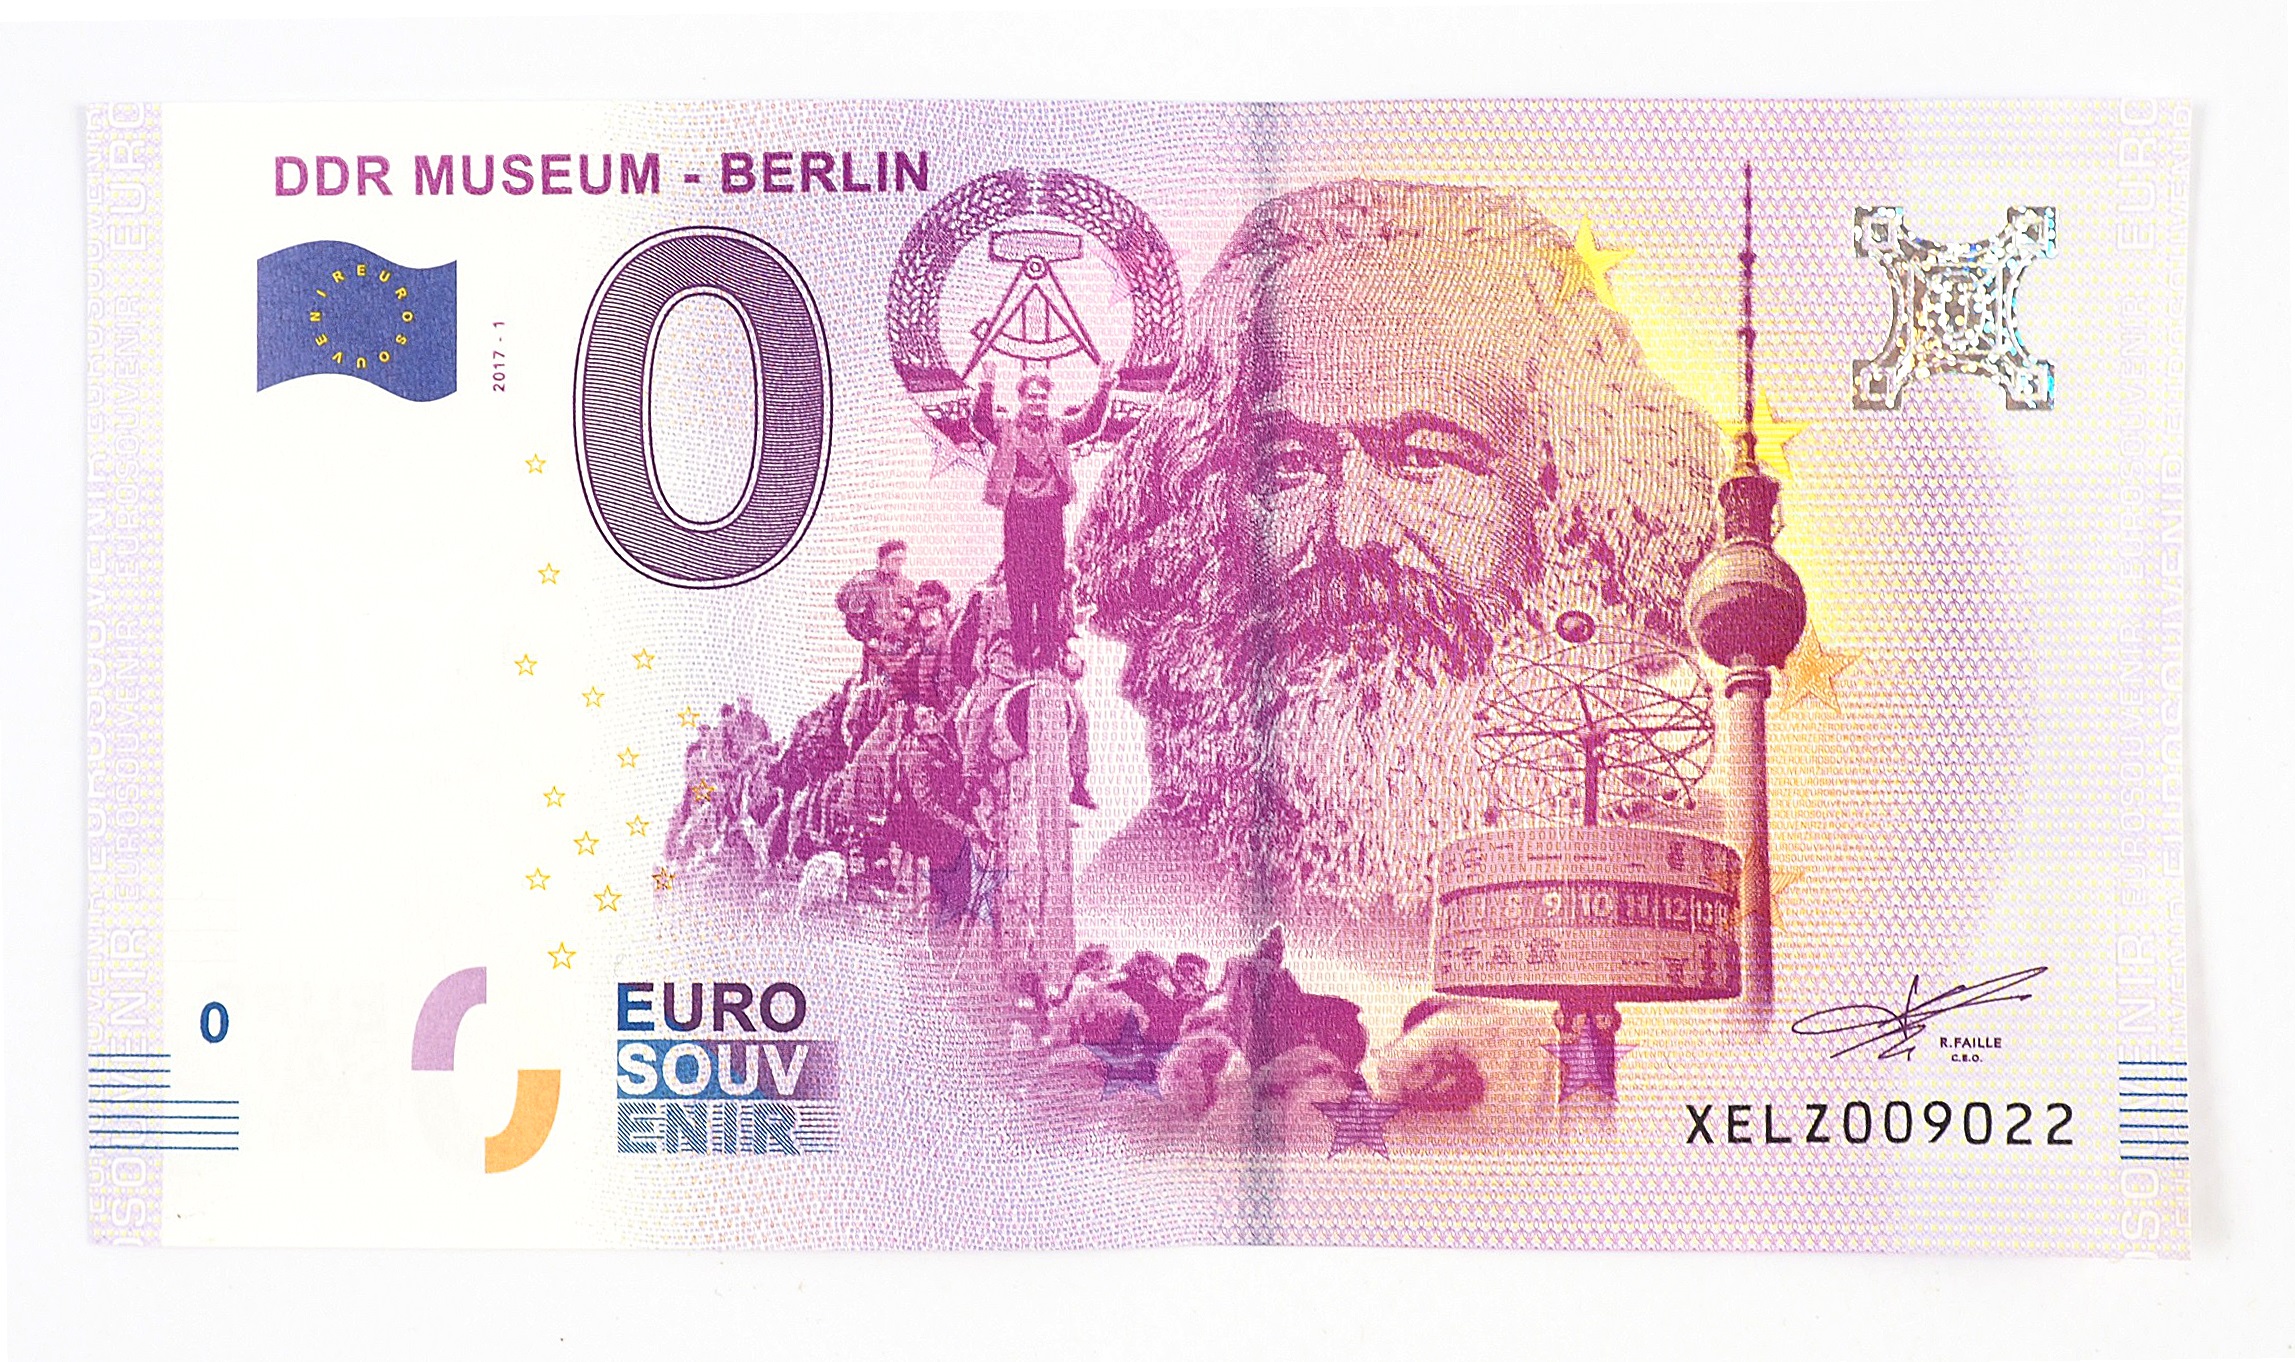 Zero-Euro-Banknote in the DDR Museum. :: DDR Museum